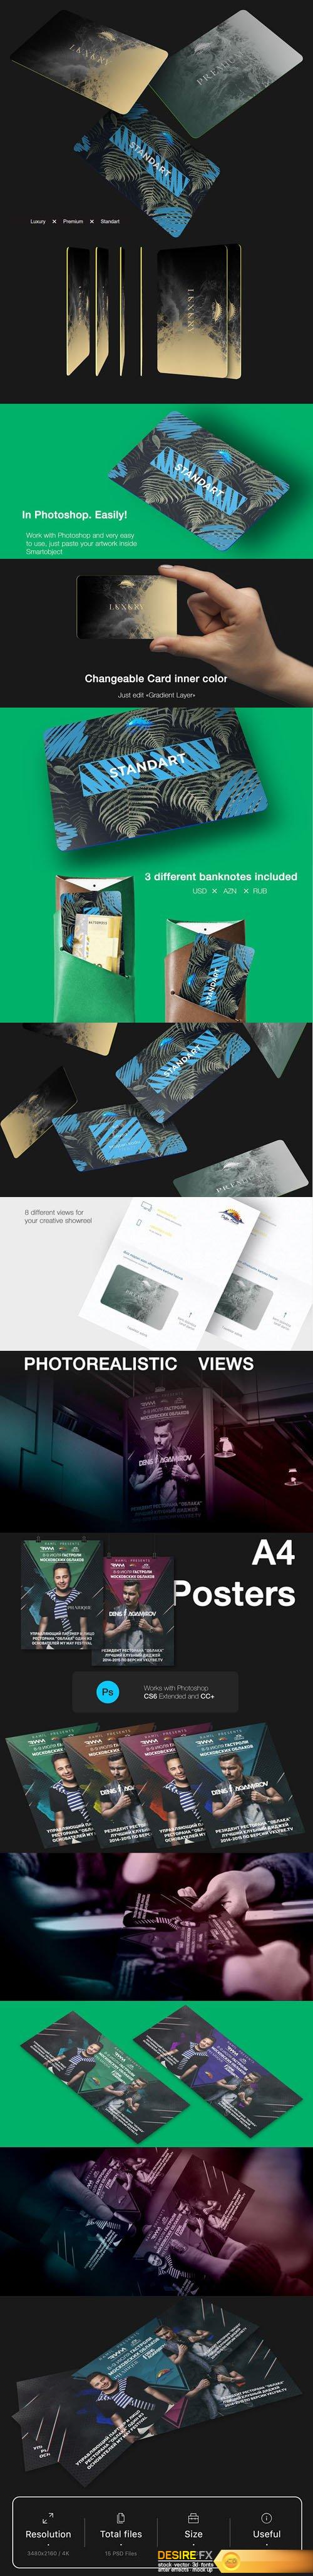 Cards, Posters and Tickets Mockups Pack PSD